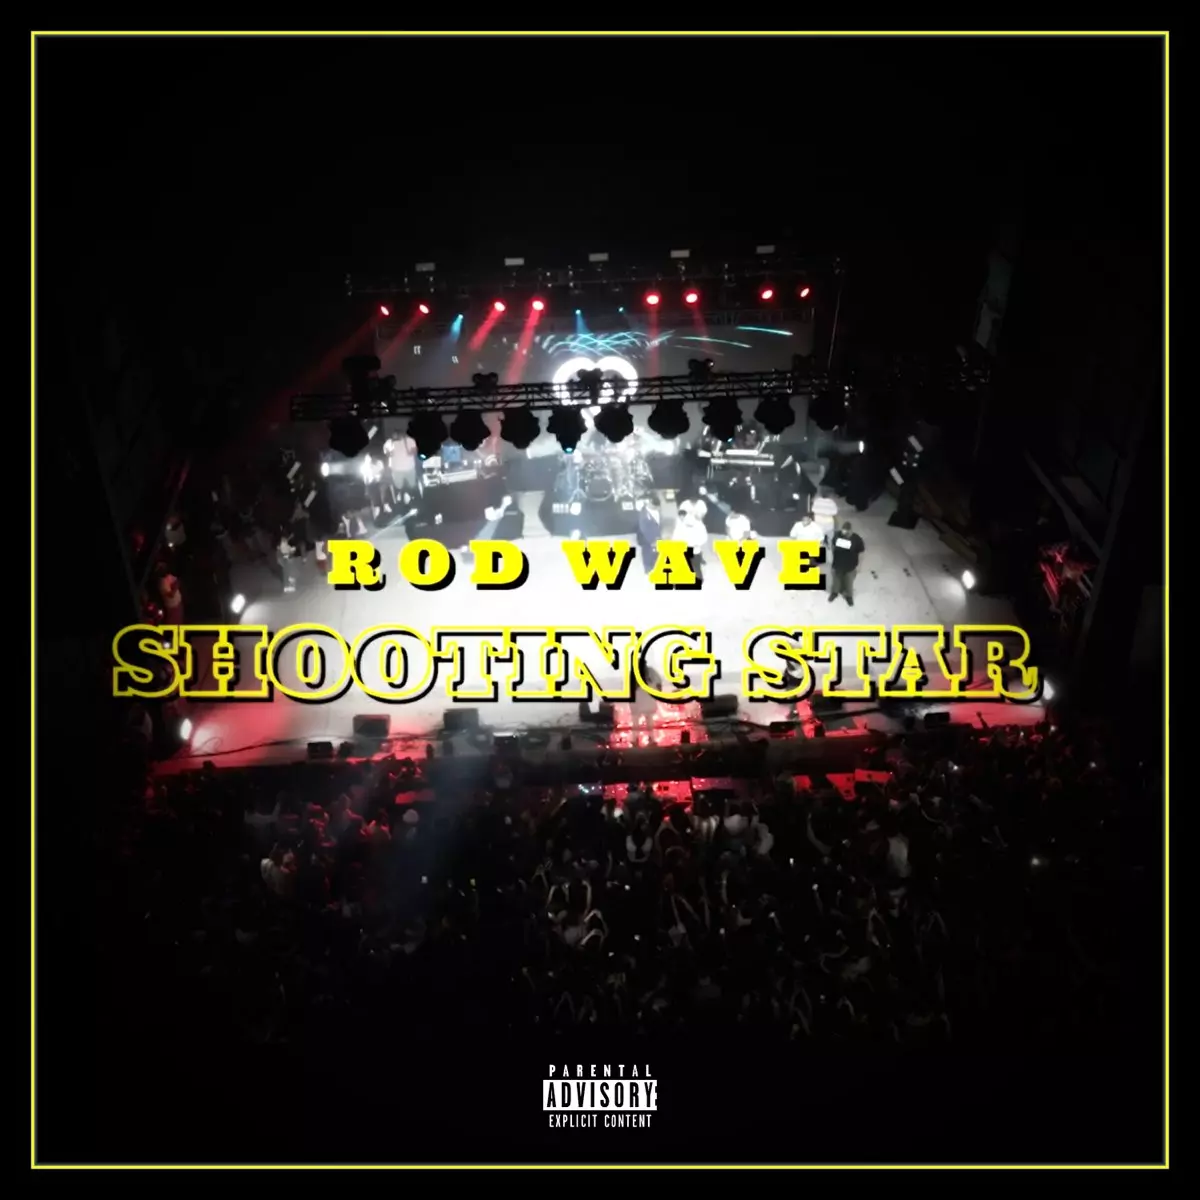 Shooting Star - Single by Rod Wave on Apple Music